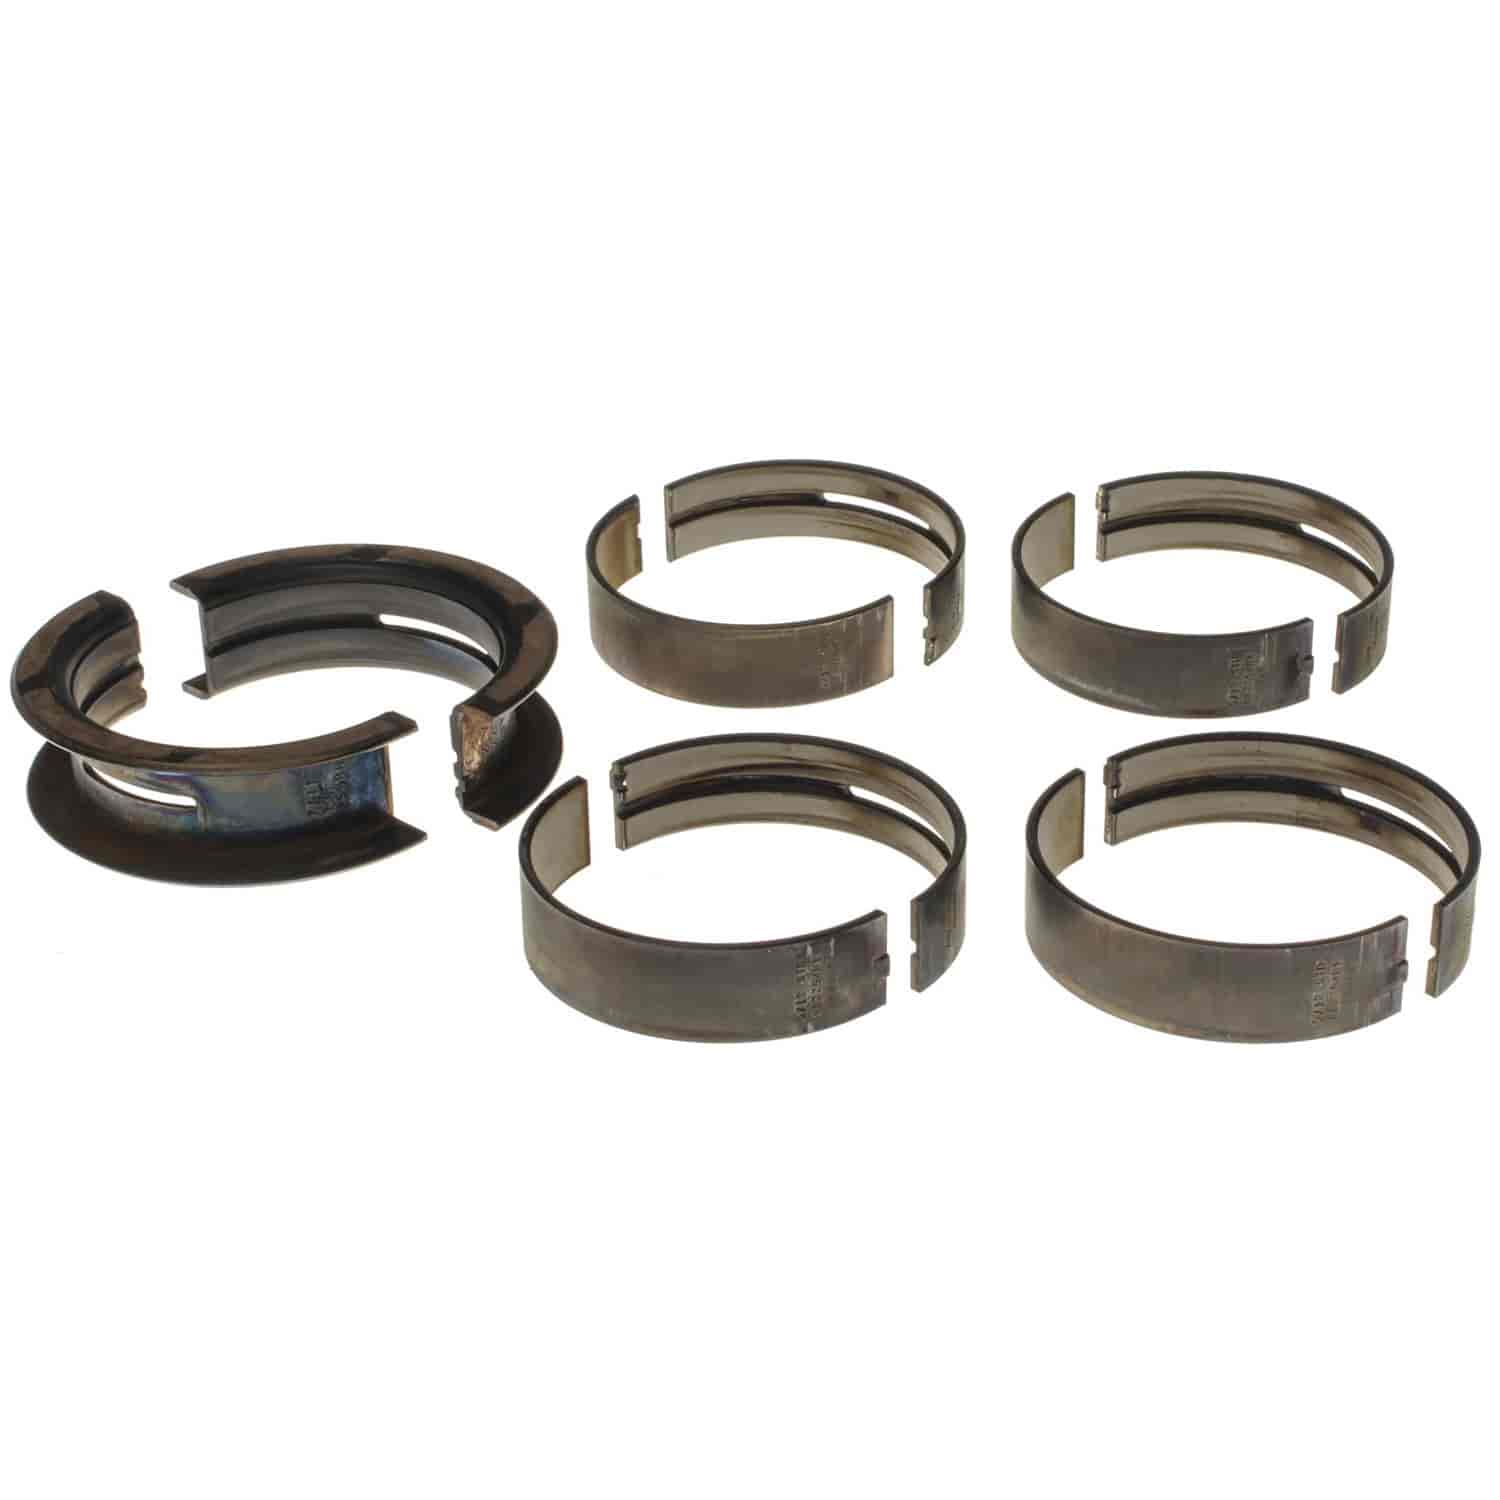 Main Bearing Set Ford 1971-1997 V8 351W/351M/400 (5.8/6.6L) with Standard Size